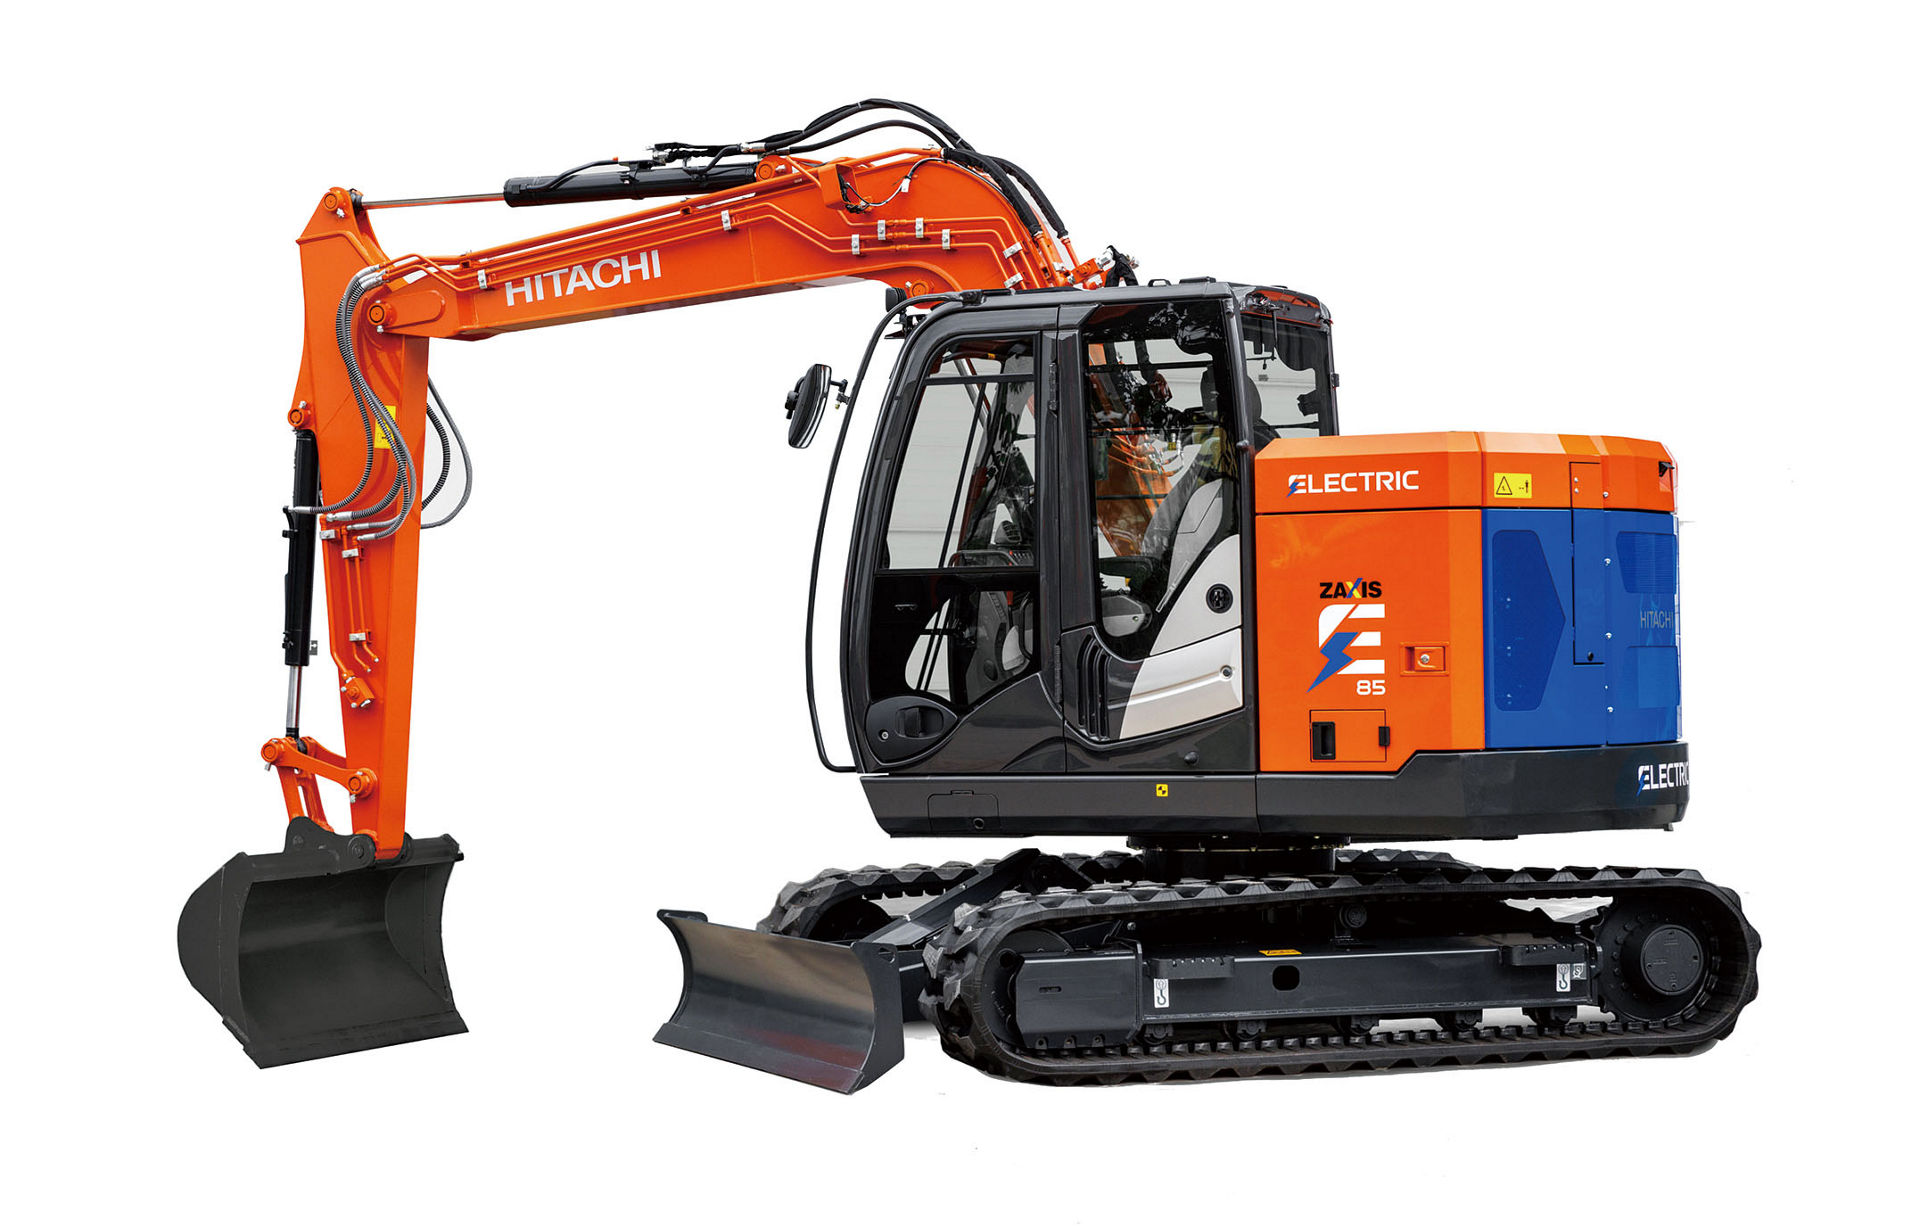 2020 - Battery-operated electric excavators